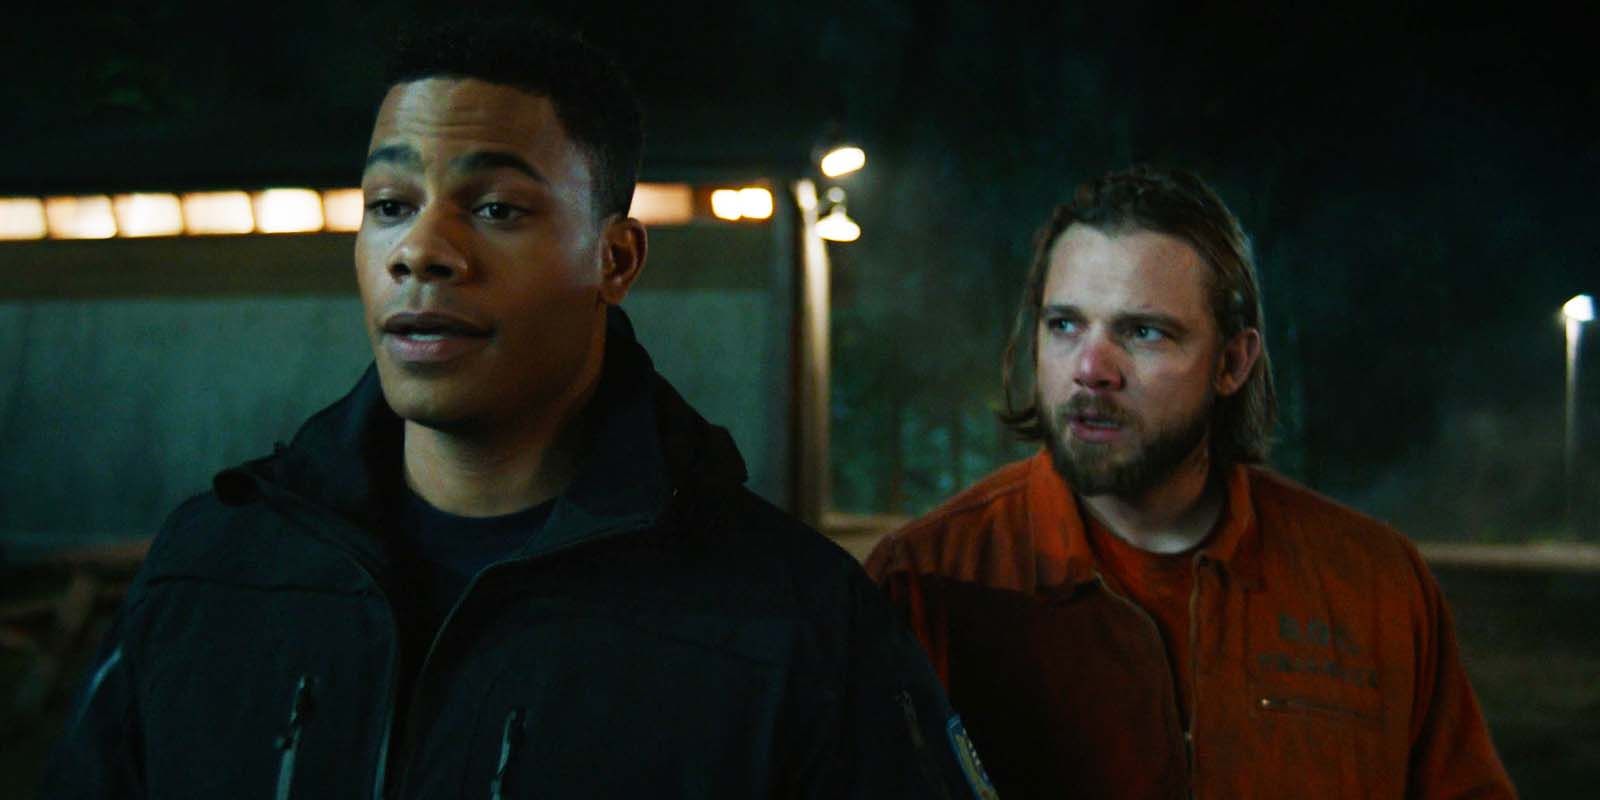 Jordan Calloway as Jake Crawford and Max Thieriot as Bode Leone in Fire Country season 2, episode 7